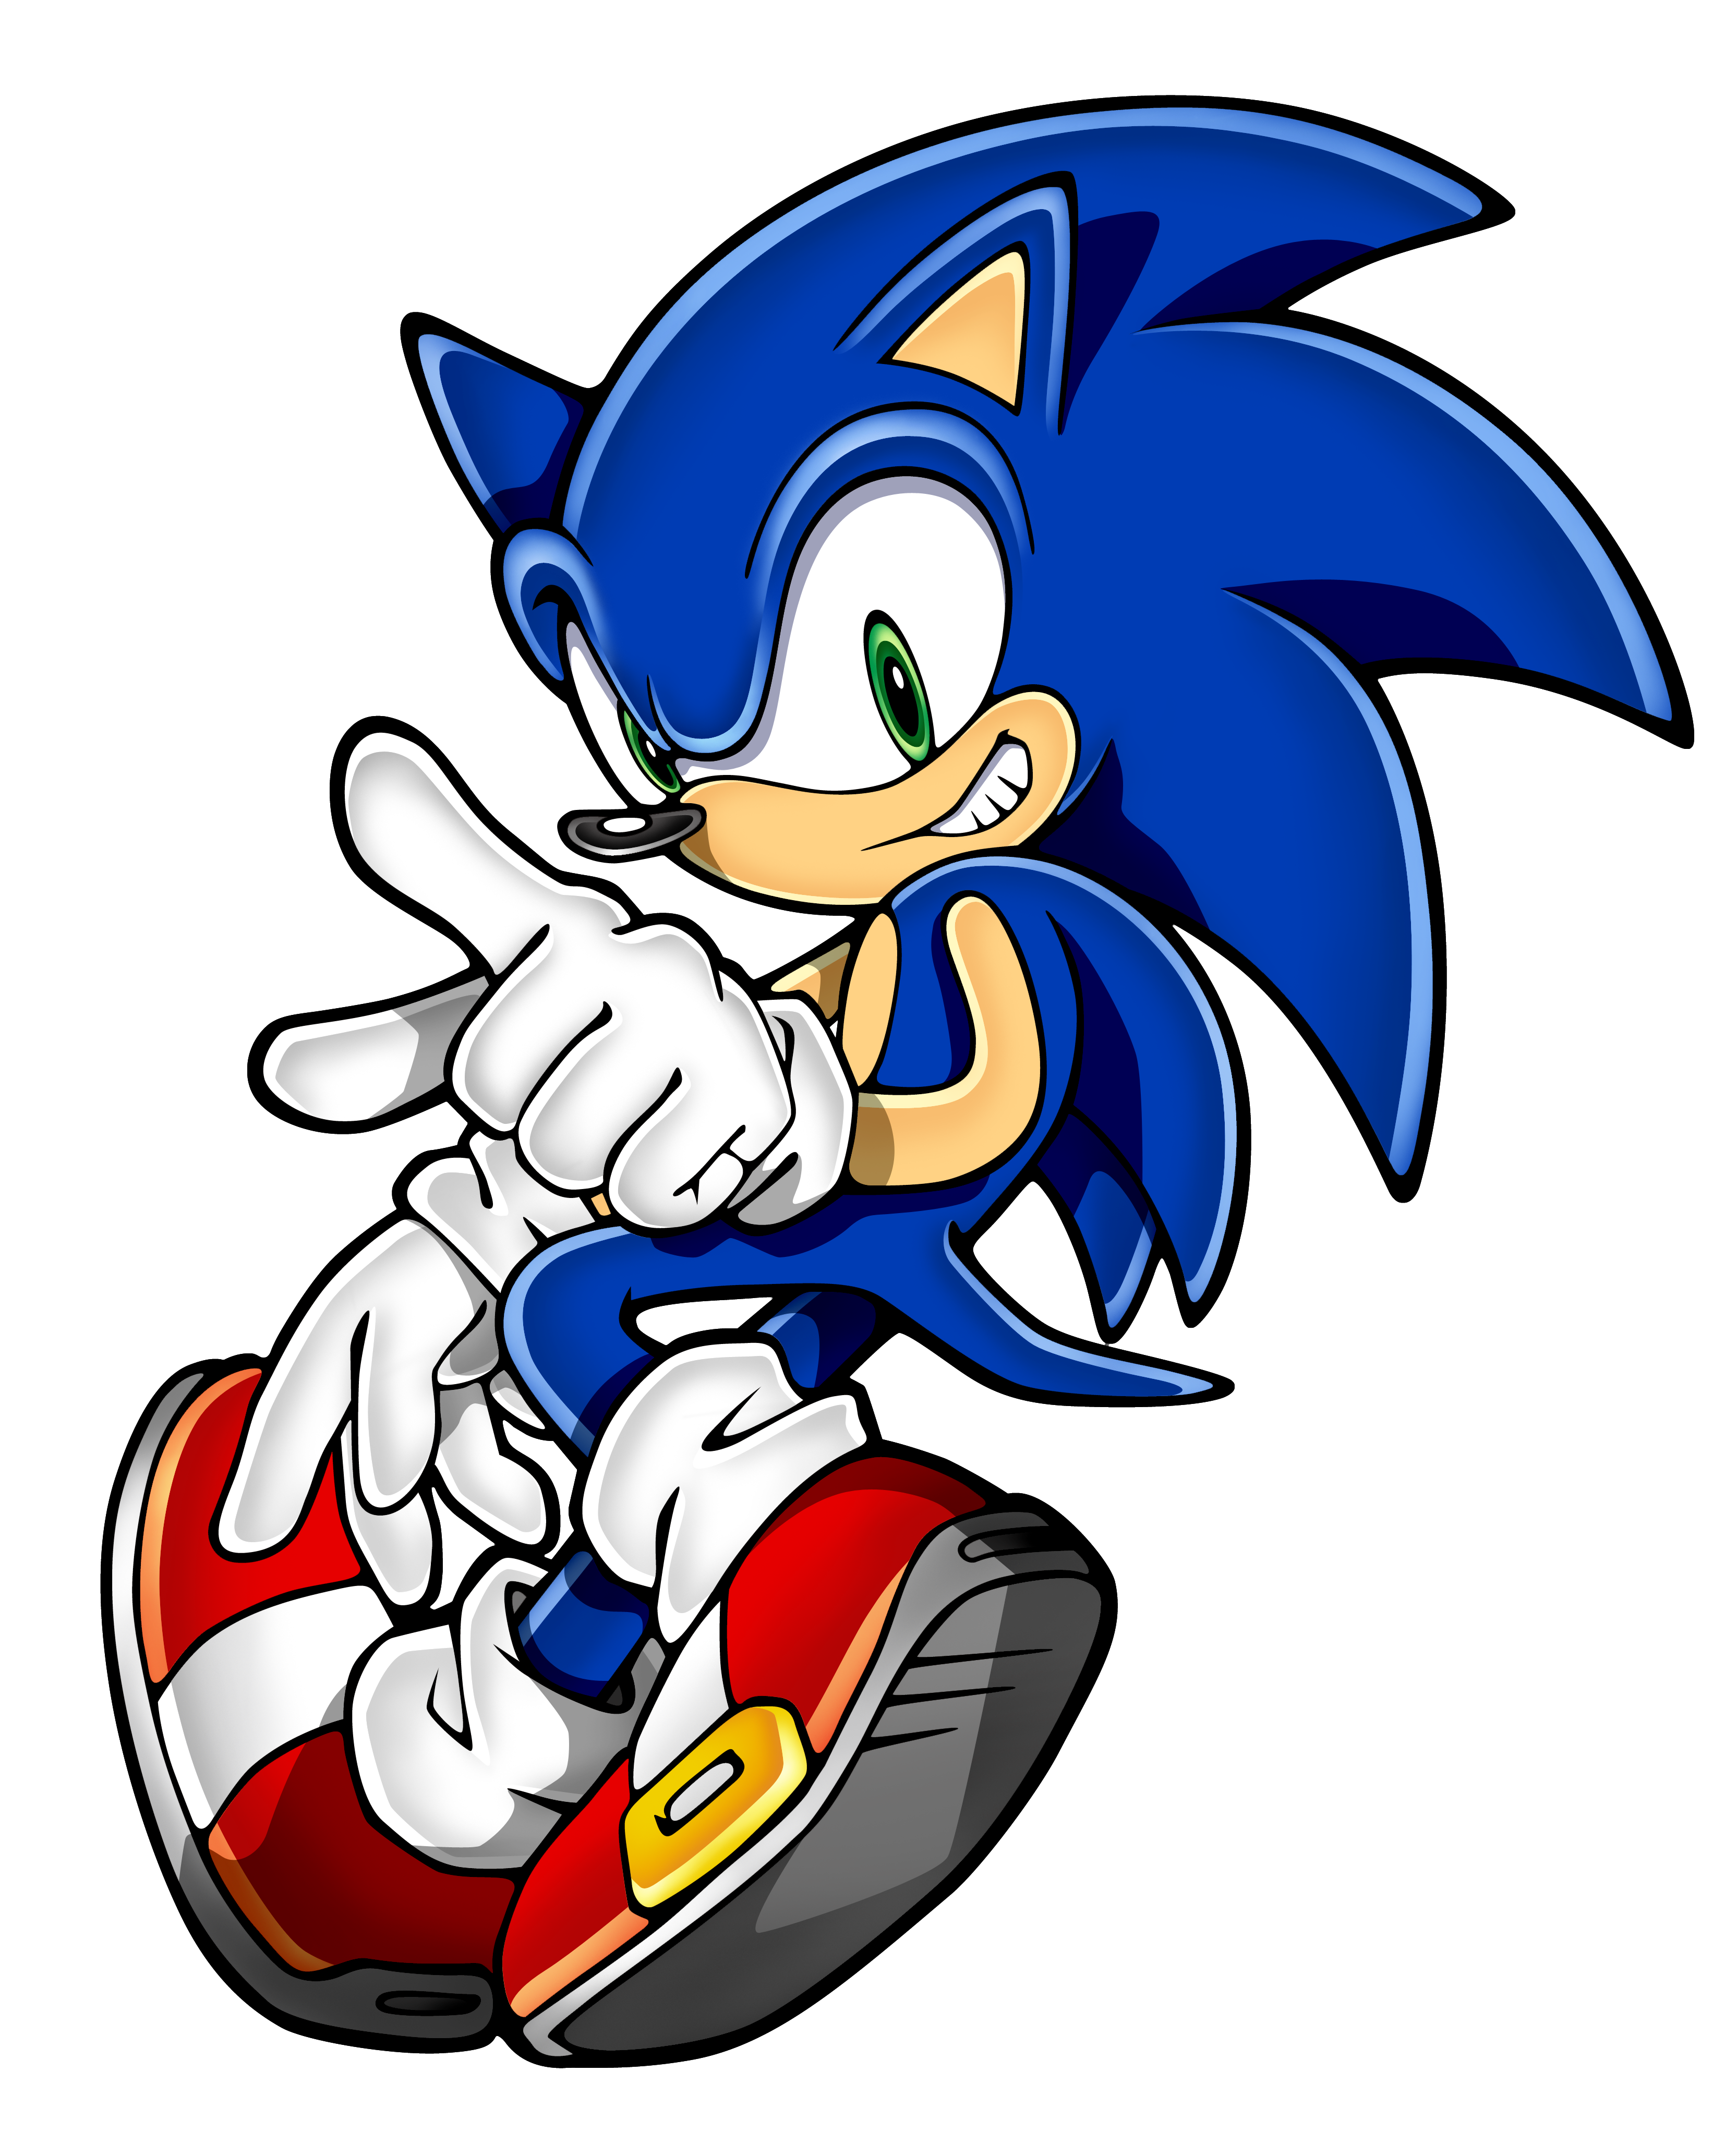 Sonic hry